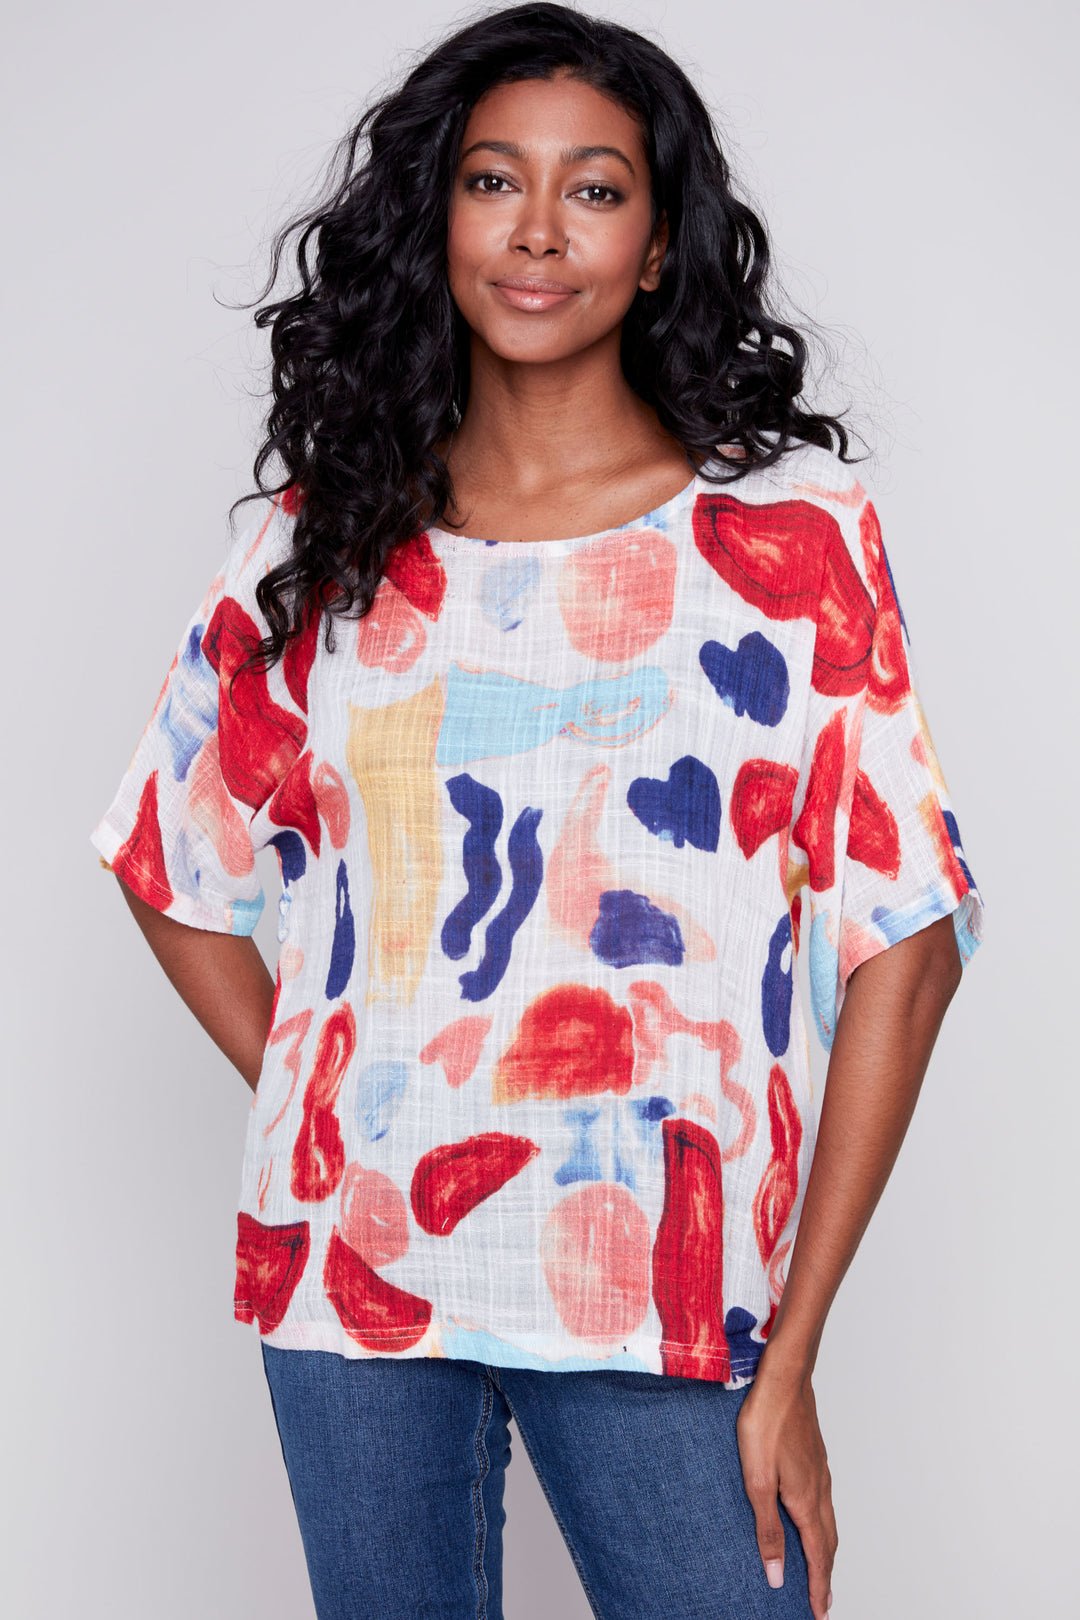 Made of soft, lightweight printed cotton gauze, this top features a neat abstract paint print all-over and trendy dolman sleeves.